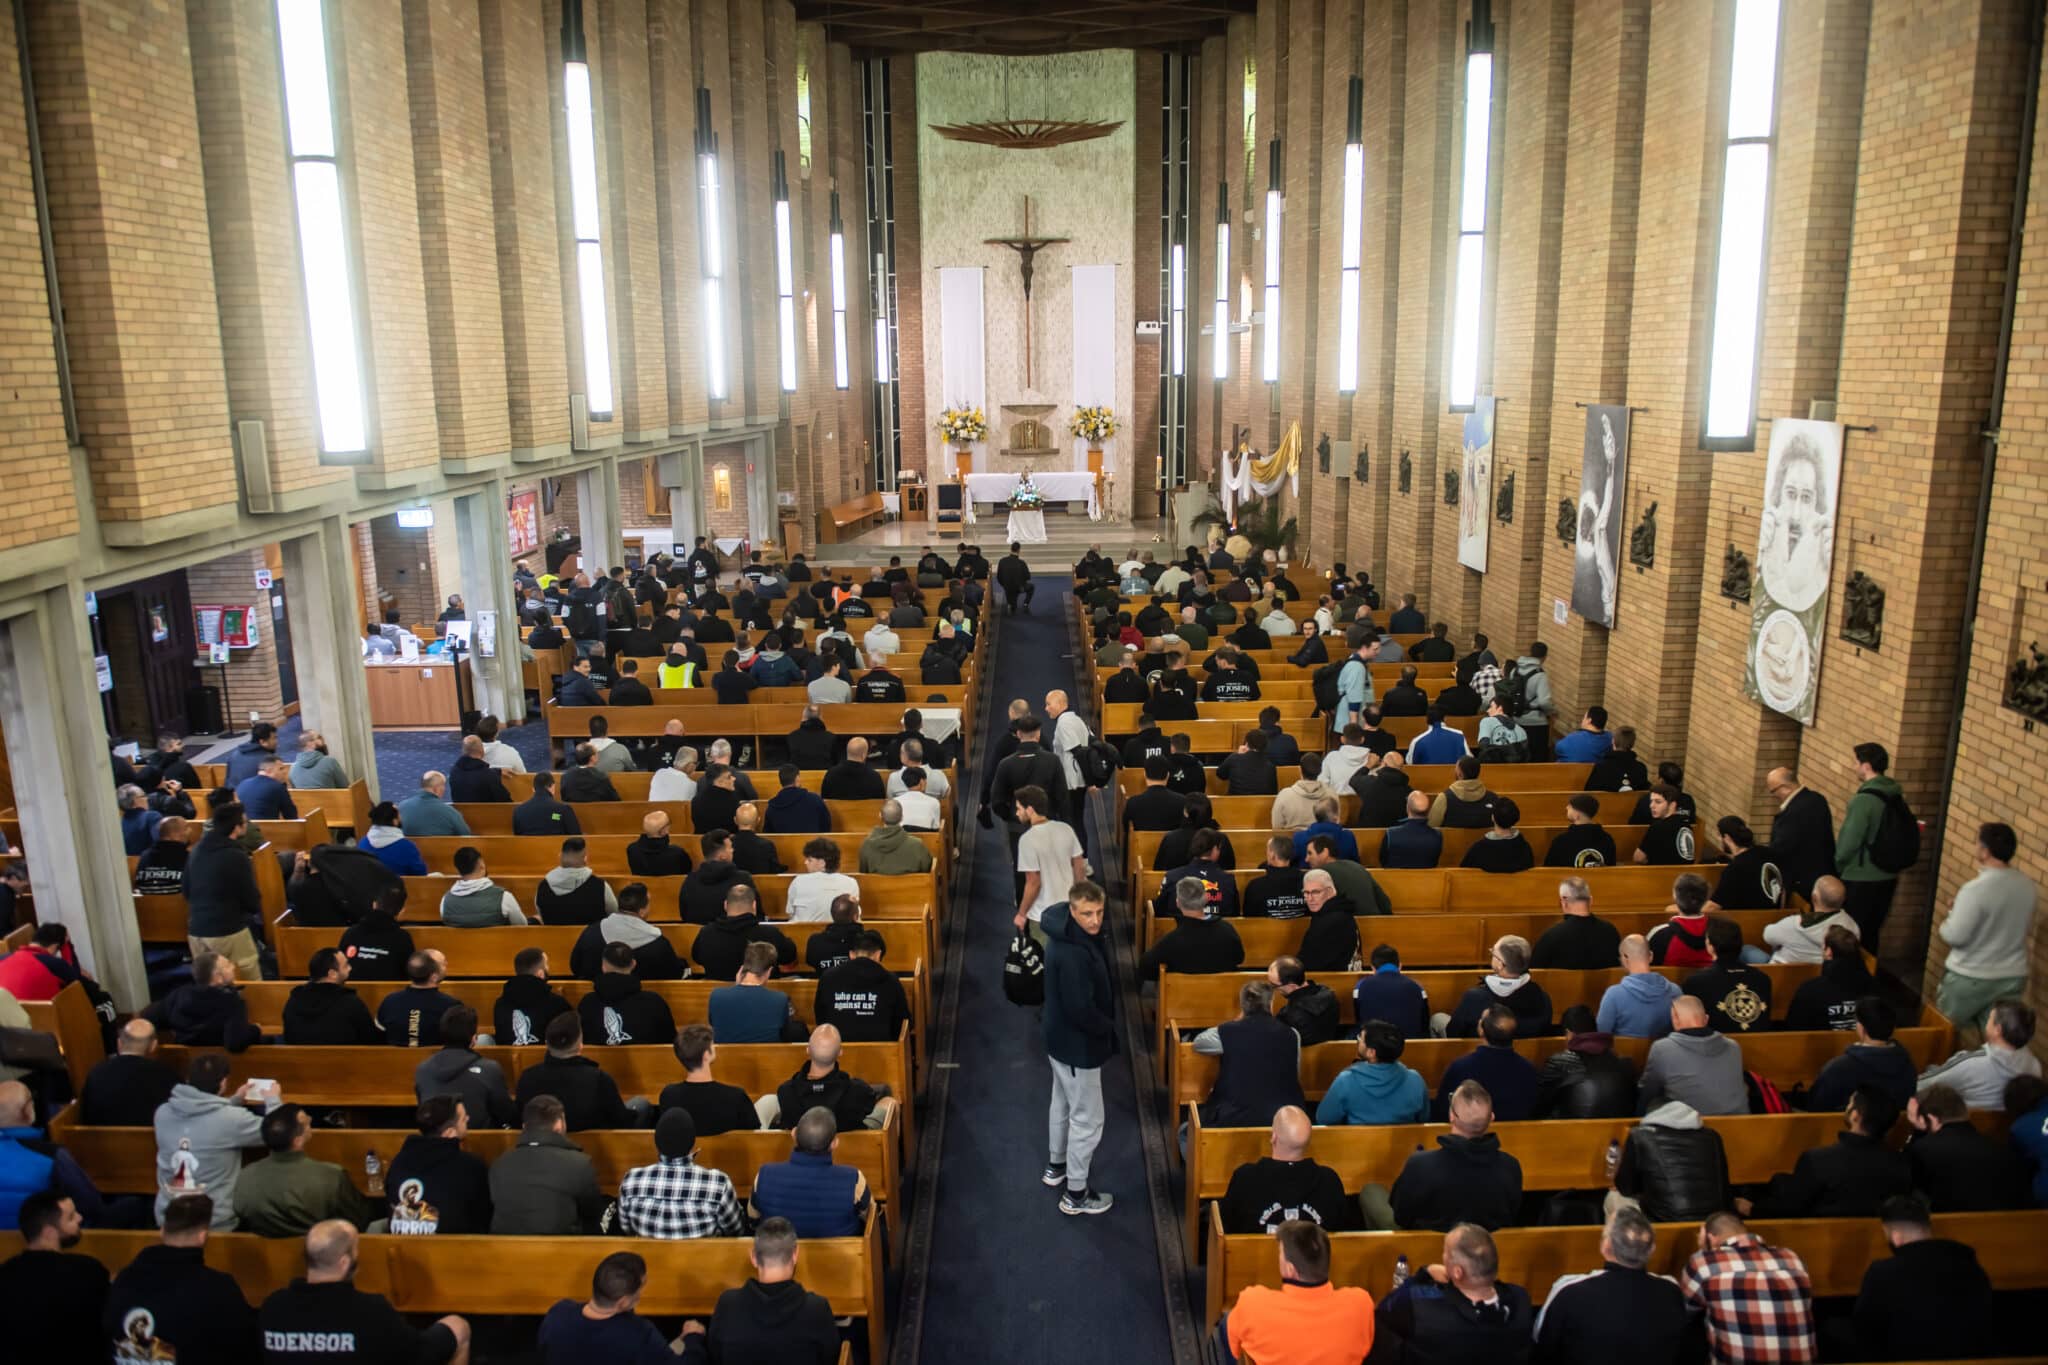 decline in Mass attendance - The Catholic weekly